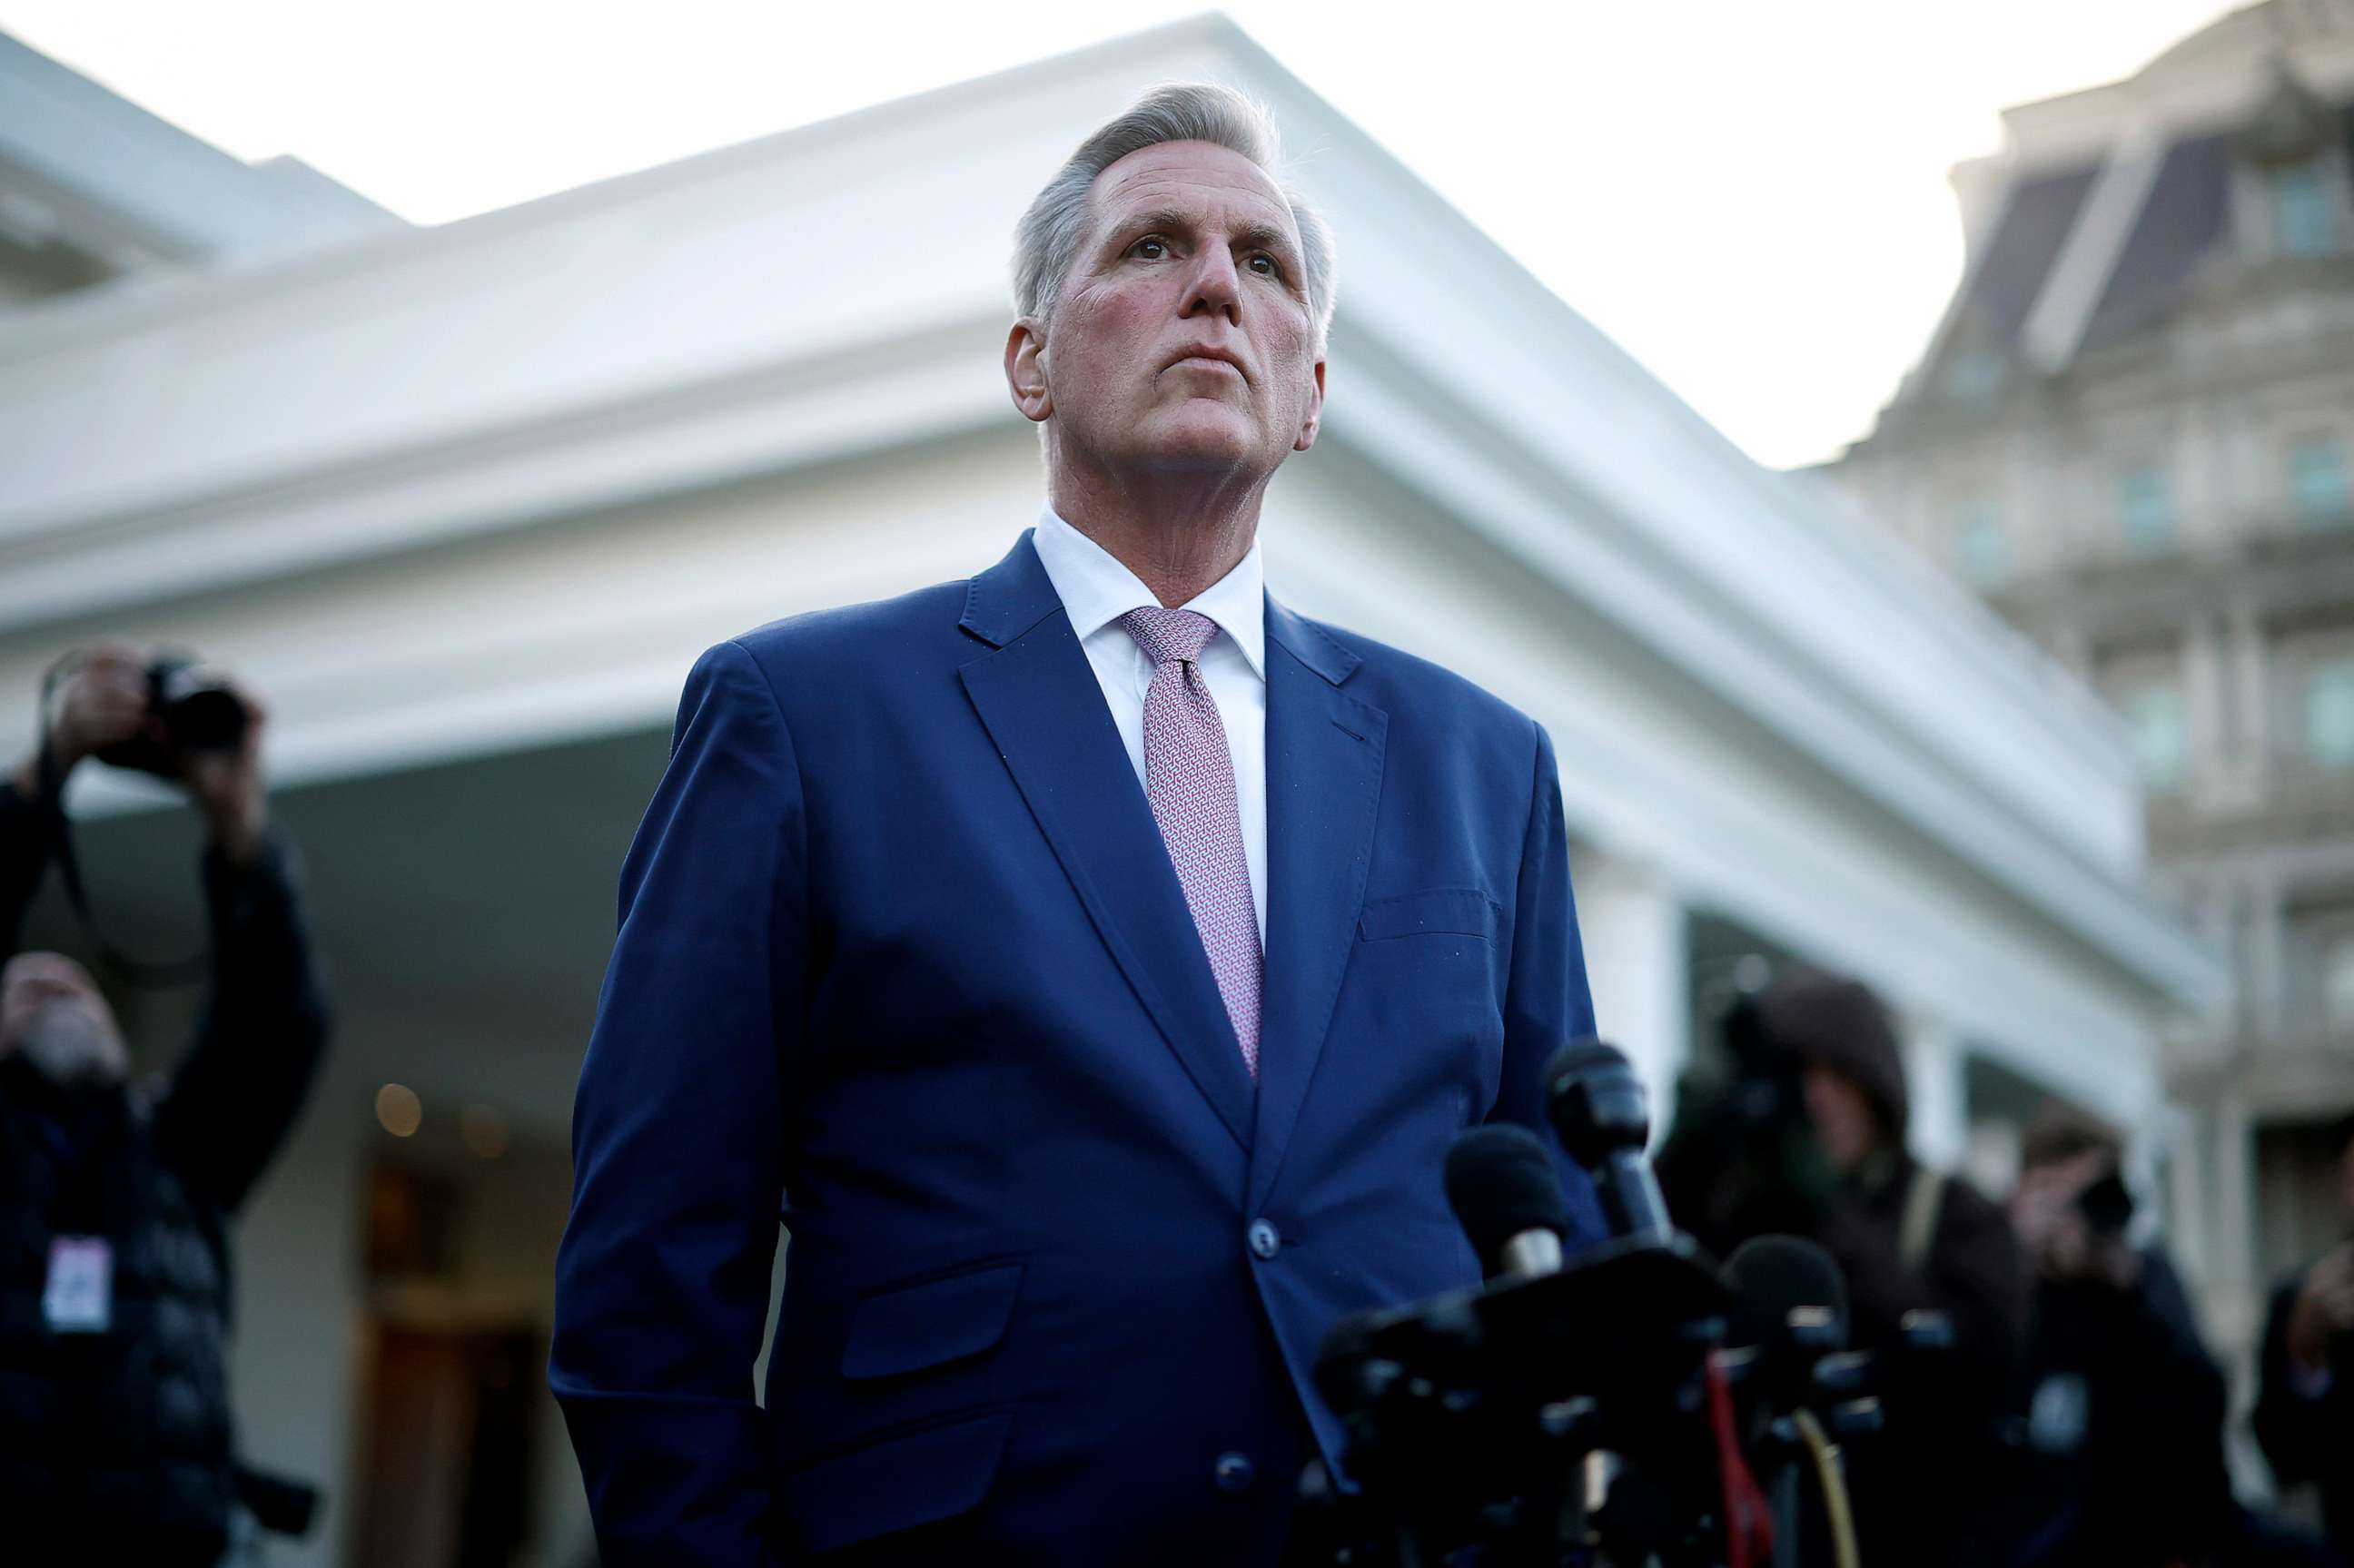 PHOTO: Speaker of the House Kevin McCarthy (R-CA) talks to reporters after meeting with President Joe Biden at the White House, Feb. 01, 2023 in Washington, DC.